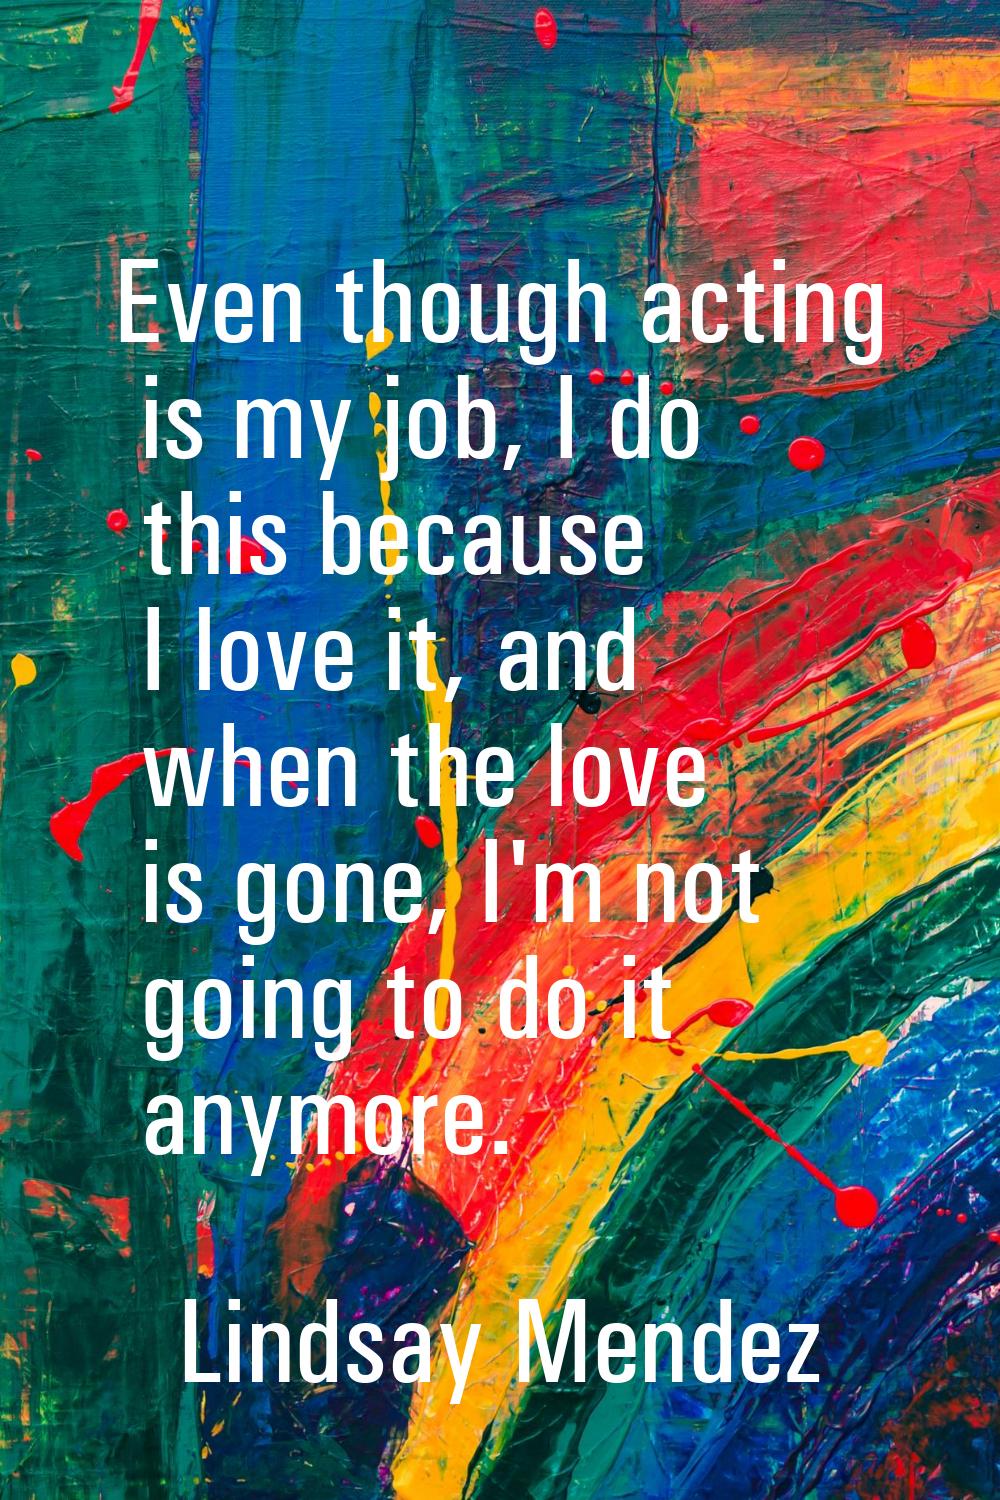 Even though acting is my job, I do this because I love it, and when the love is gone, I'm not going